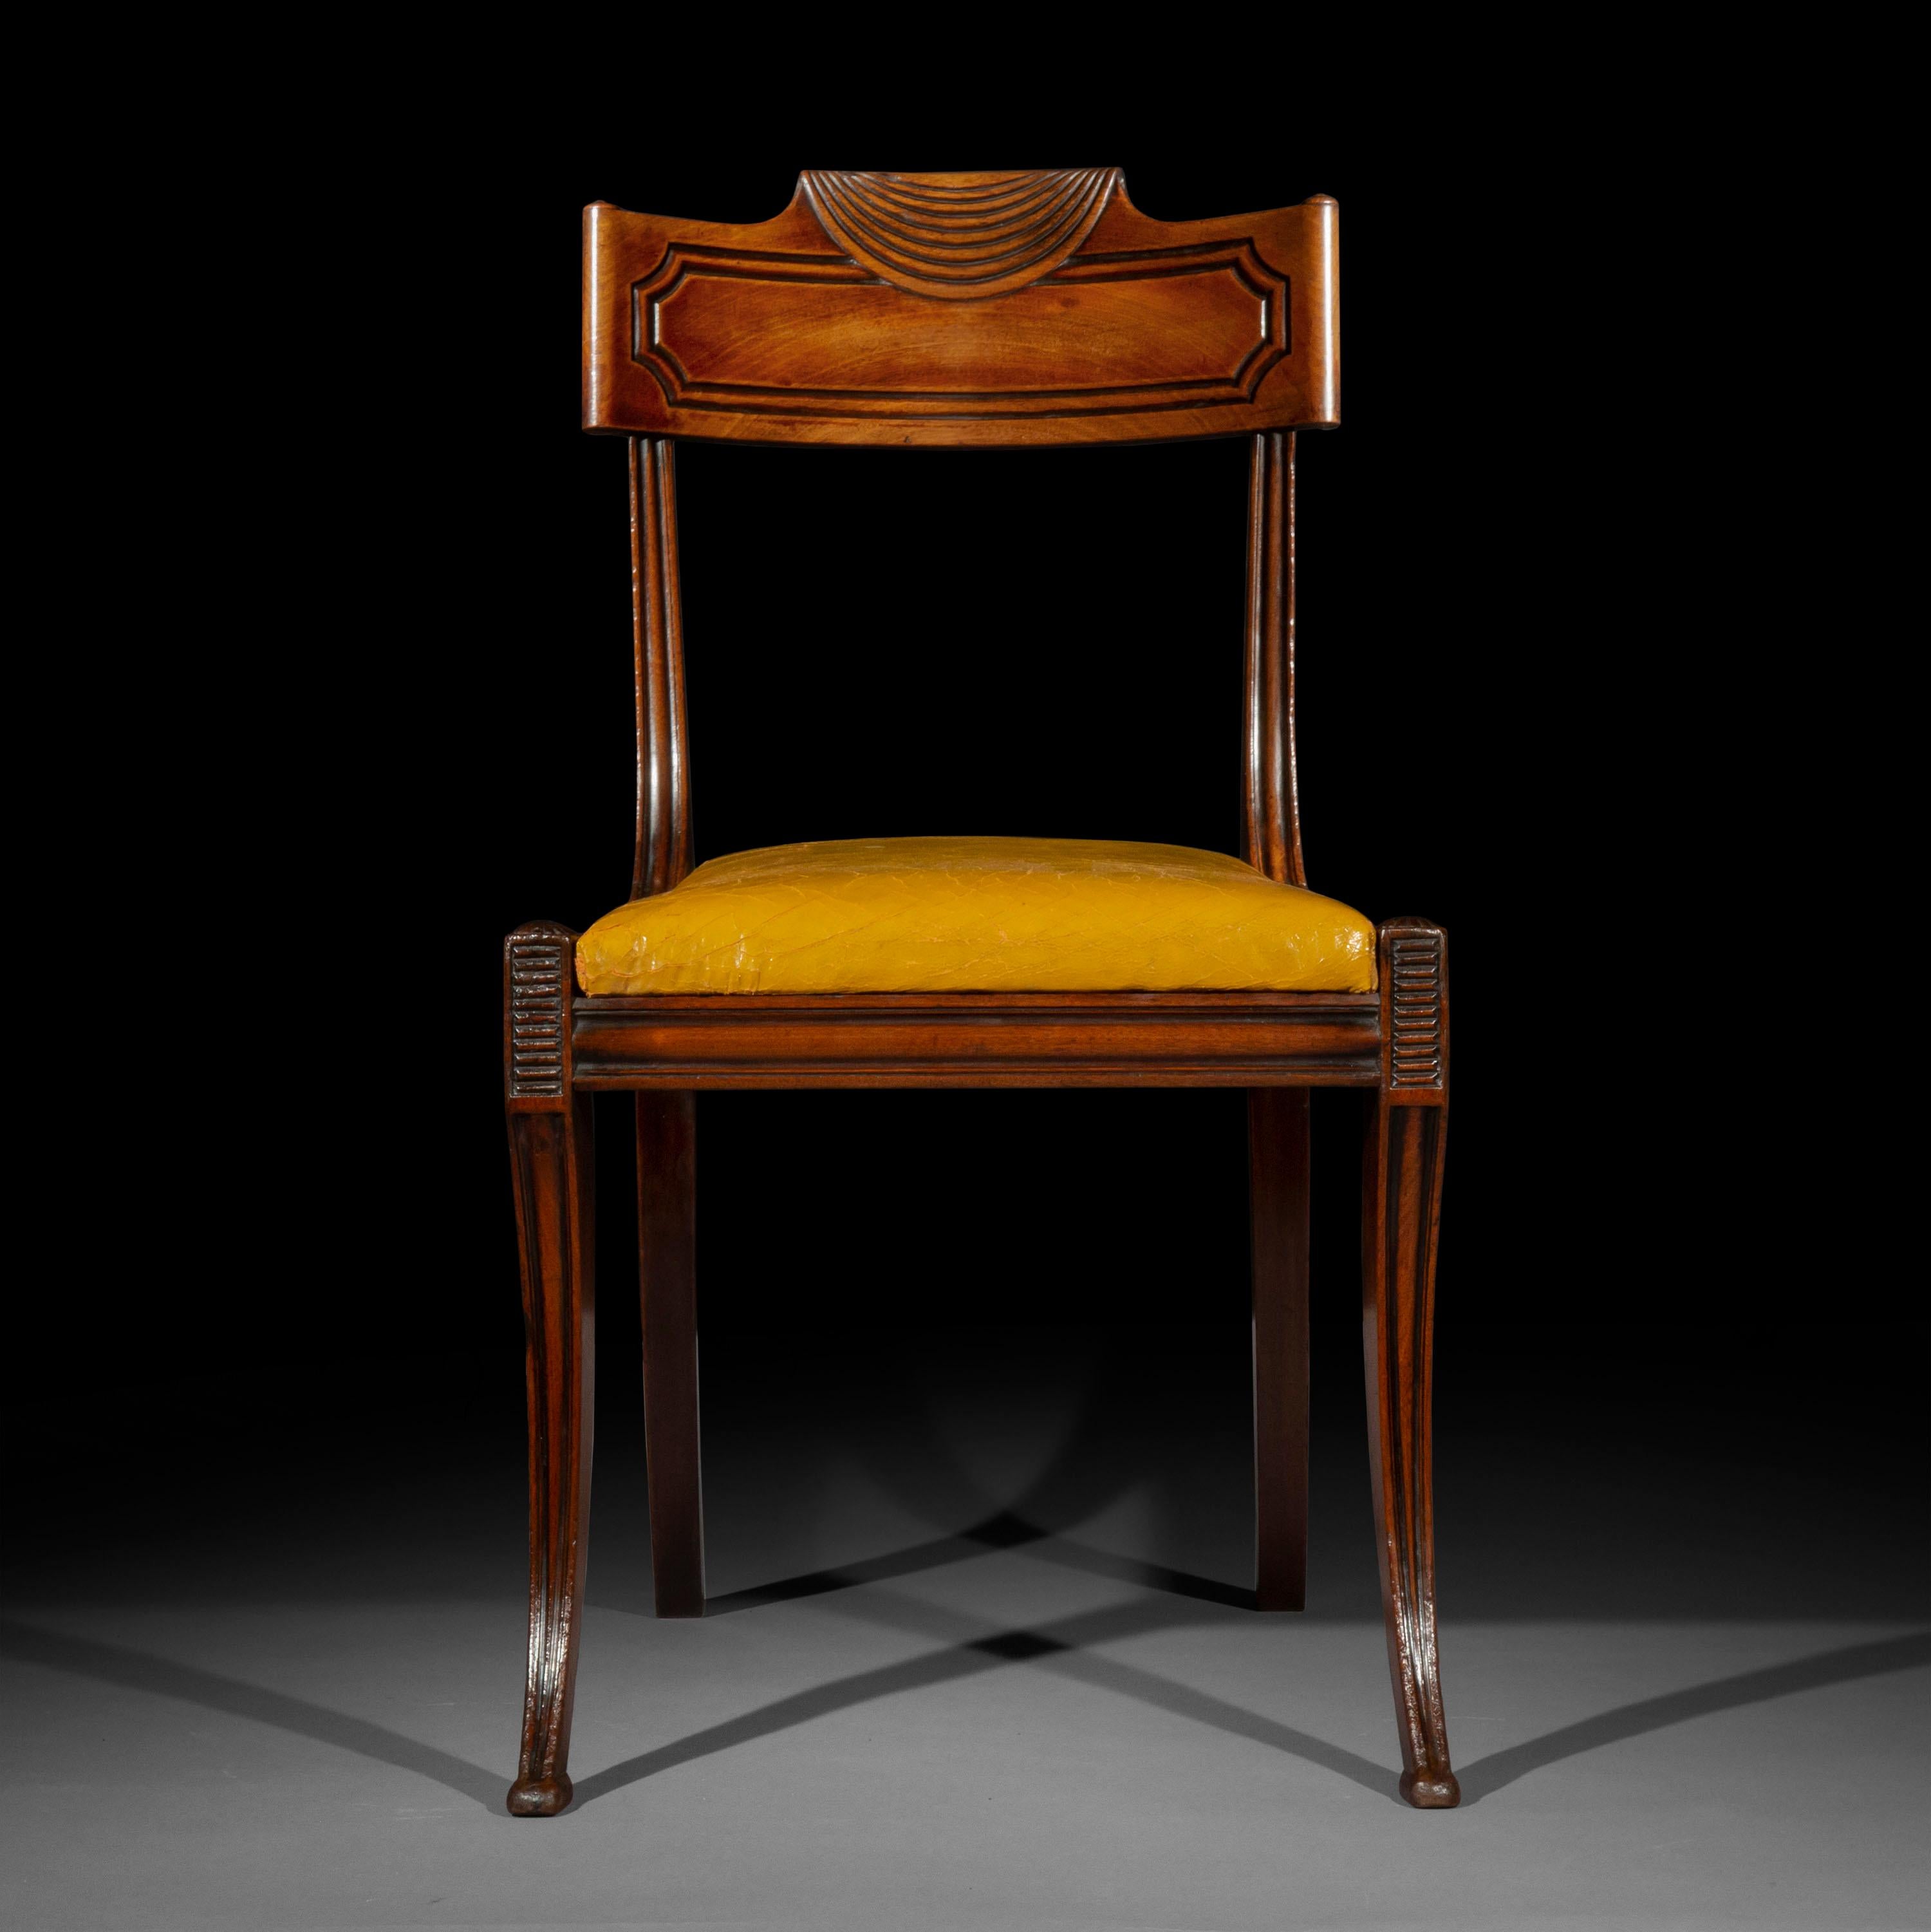 British Pair of Antique Regency Klismos Chairs in the Manner of Marsh and Tatham